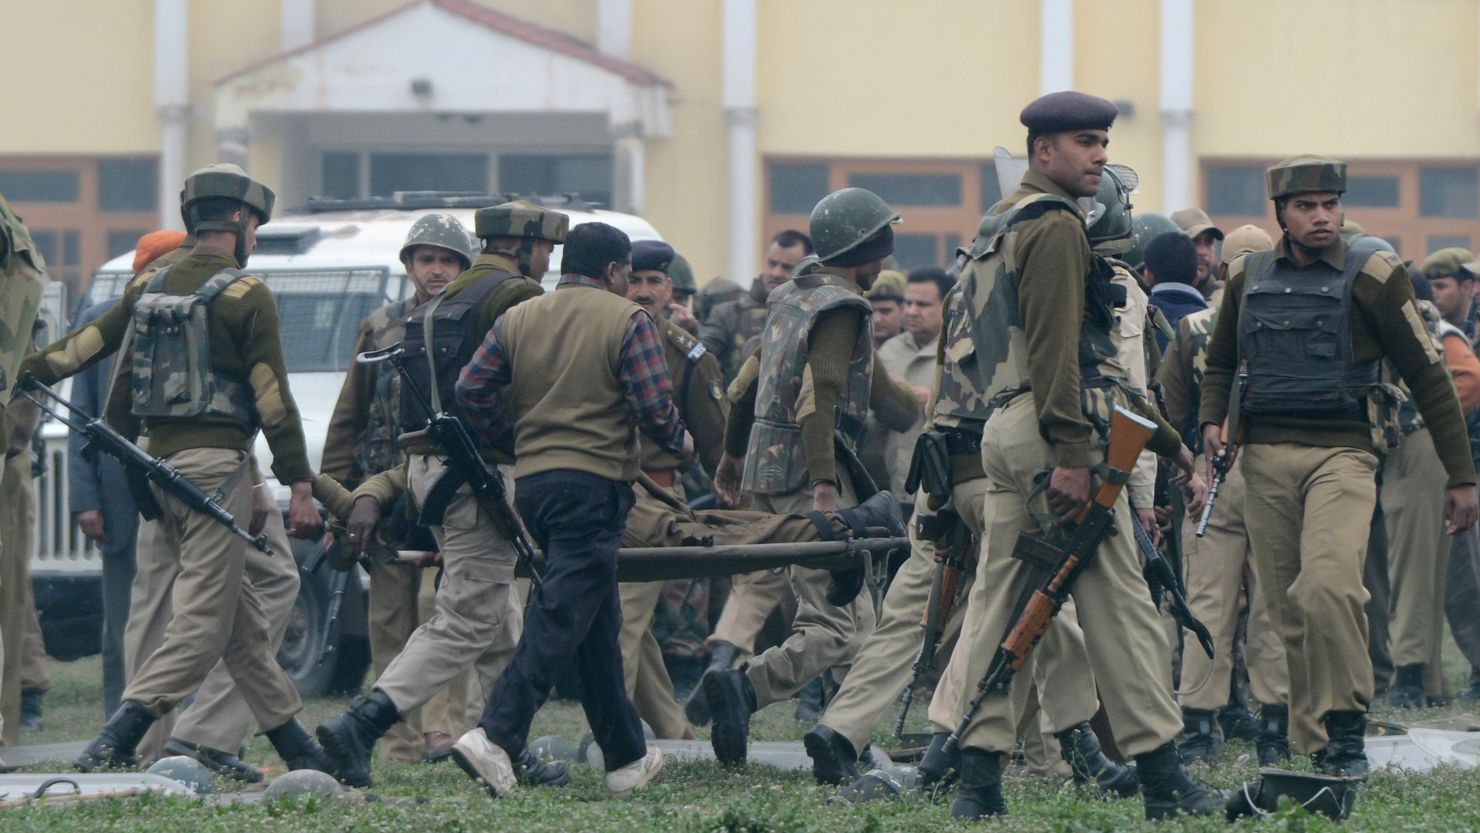 Indian paramilitary personnel carry away a fallen comrade in Srinagar on Wednesday. Five Indian officers died at the police camp.